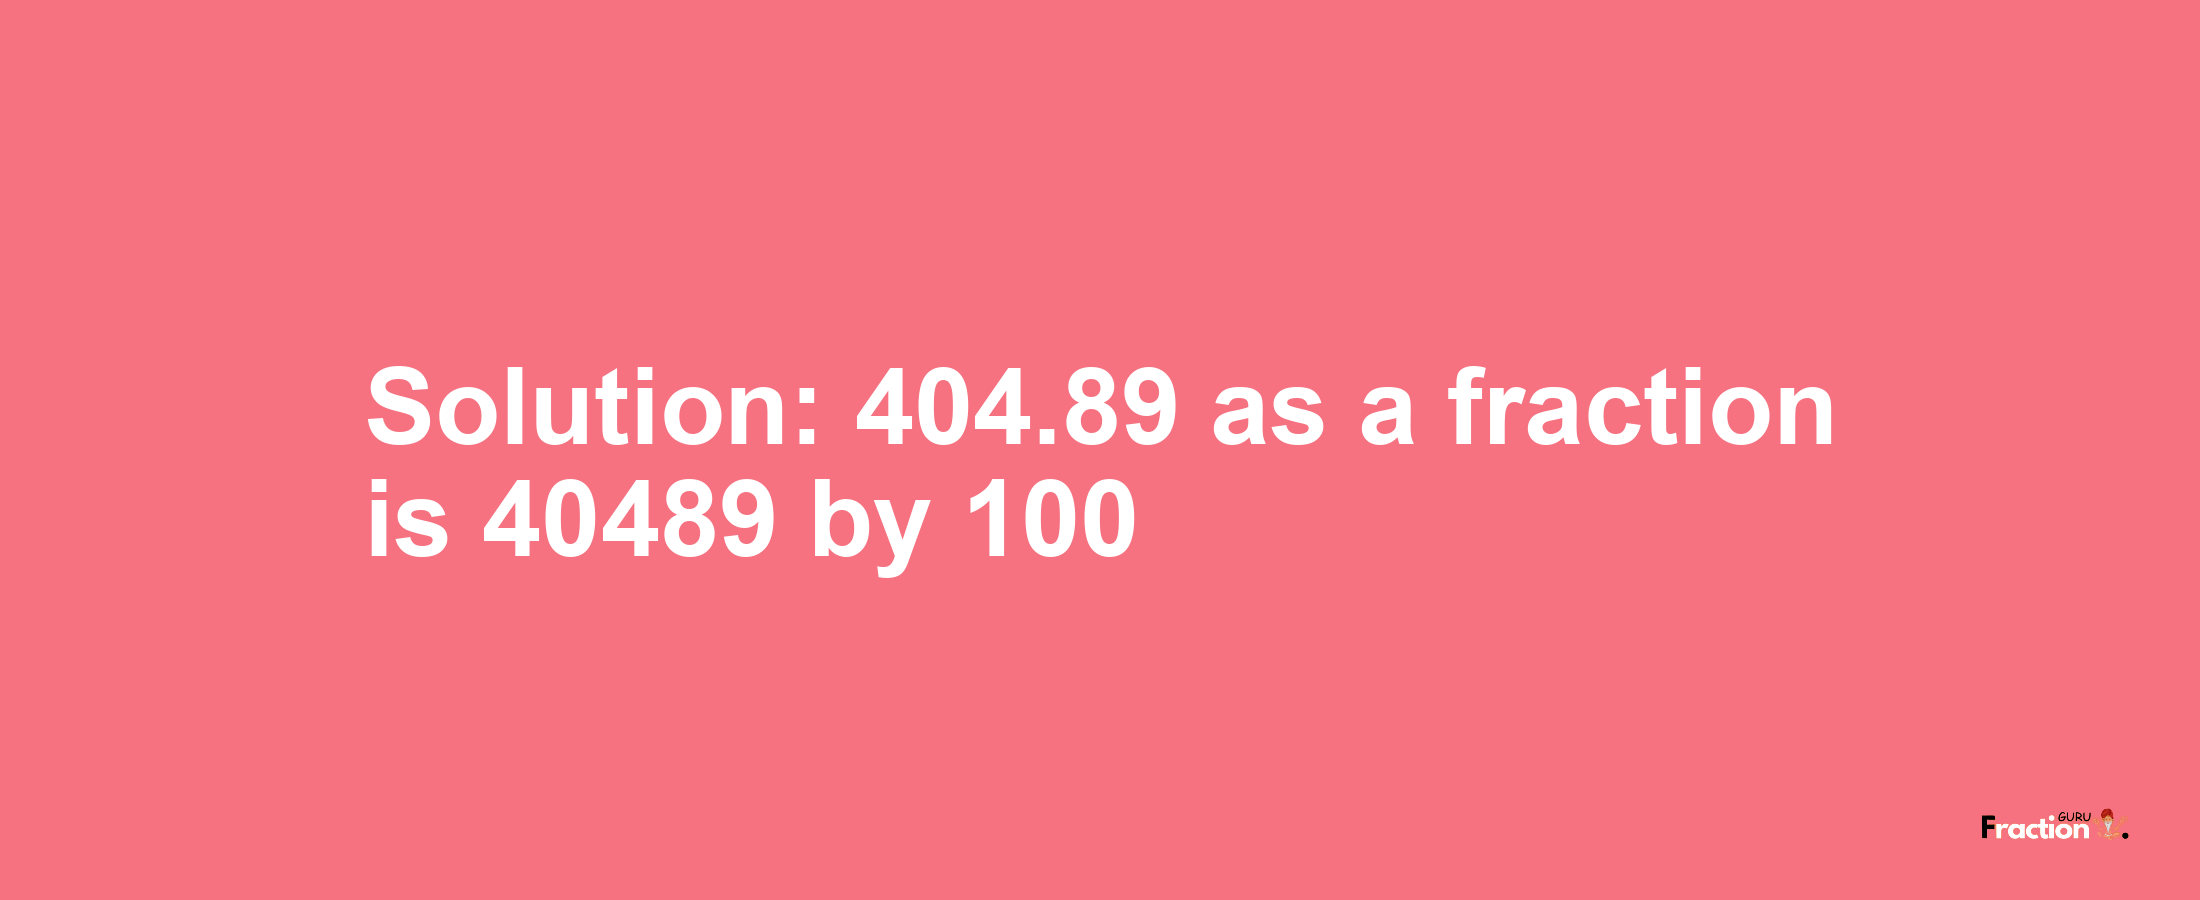 Solution:404.89 as a fraction is 40489/100